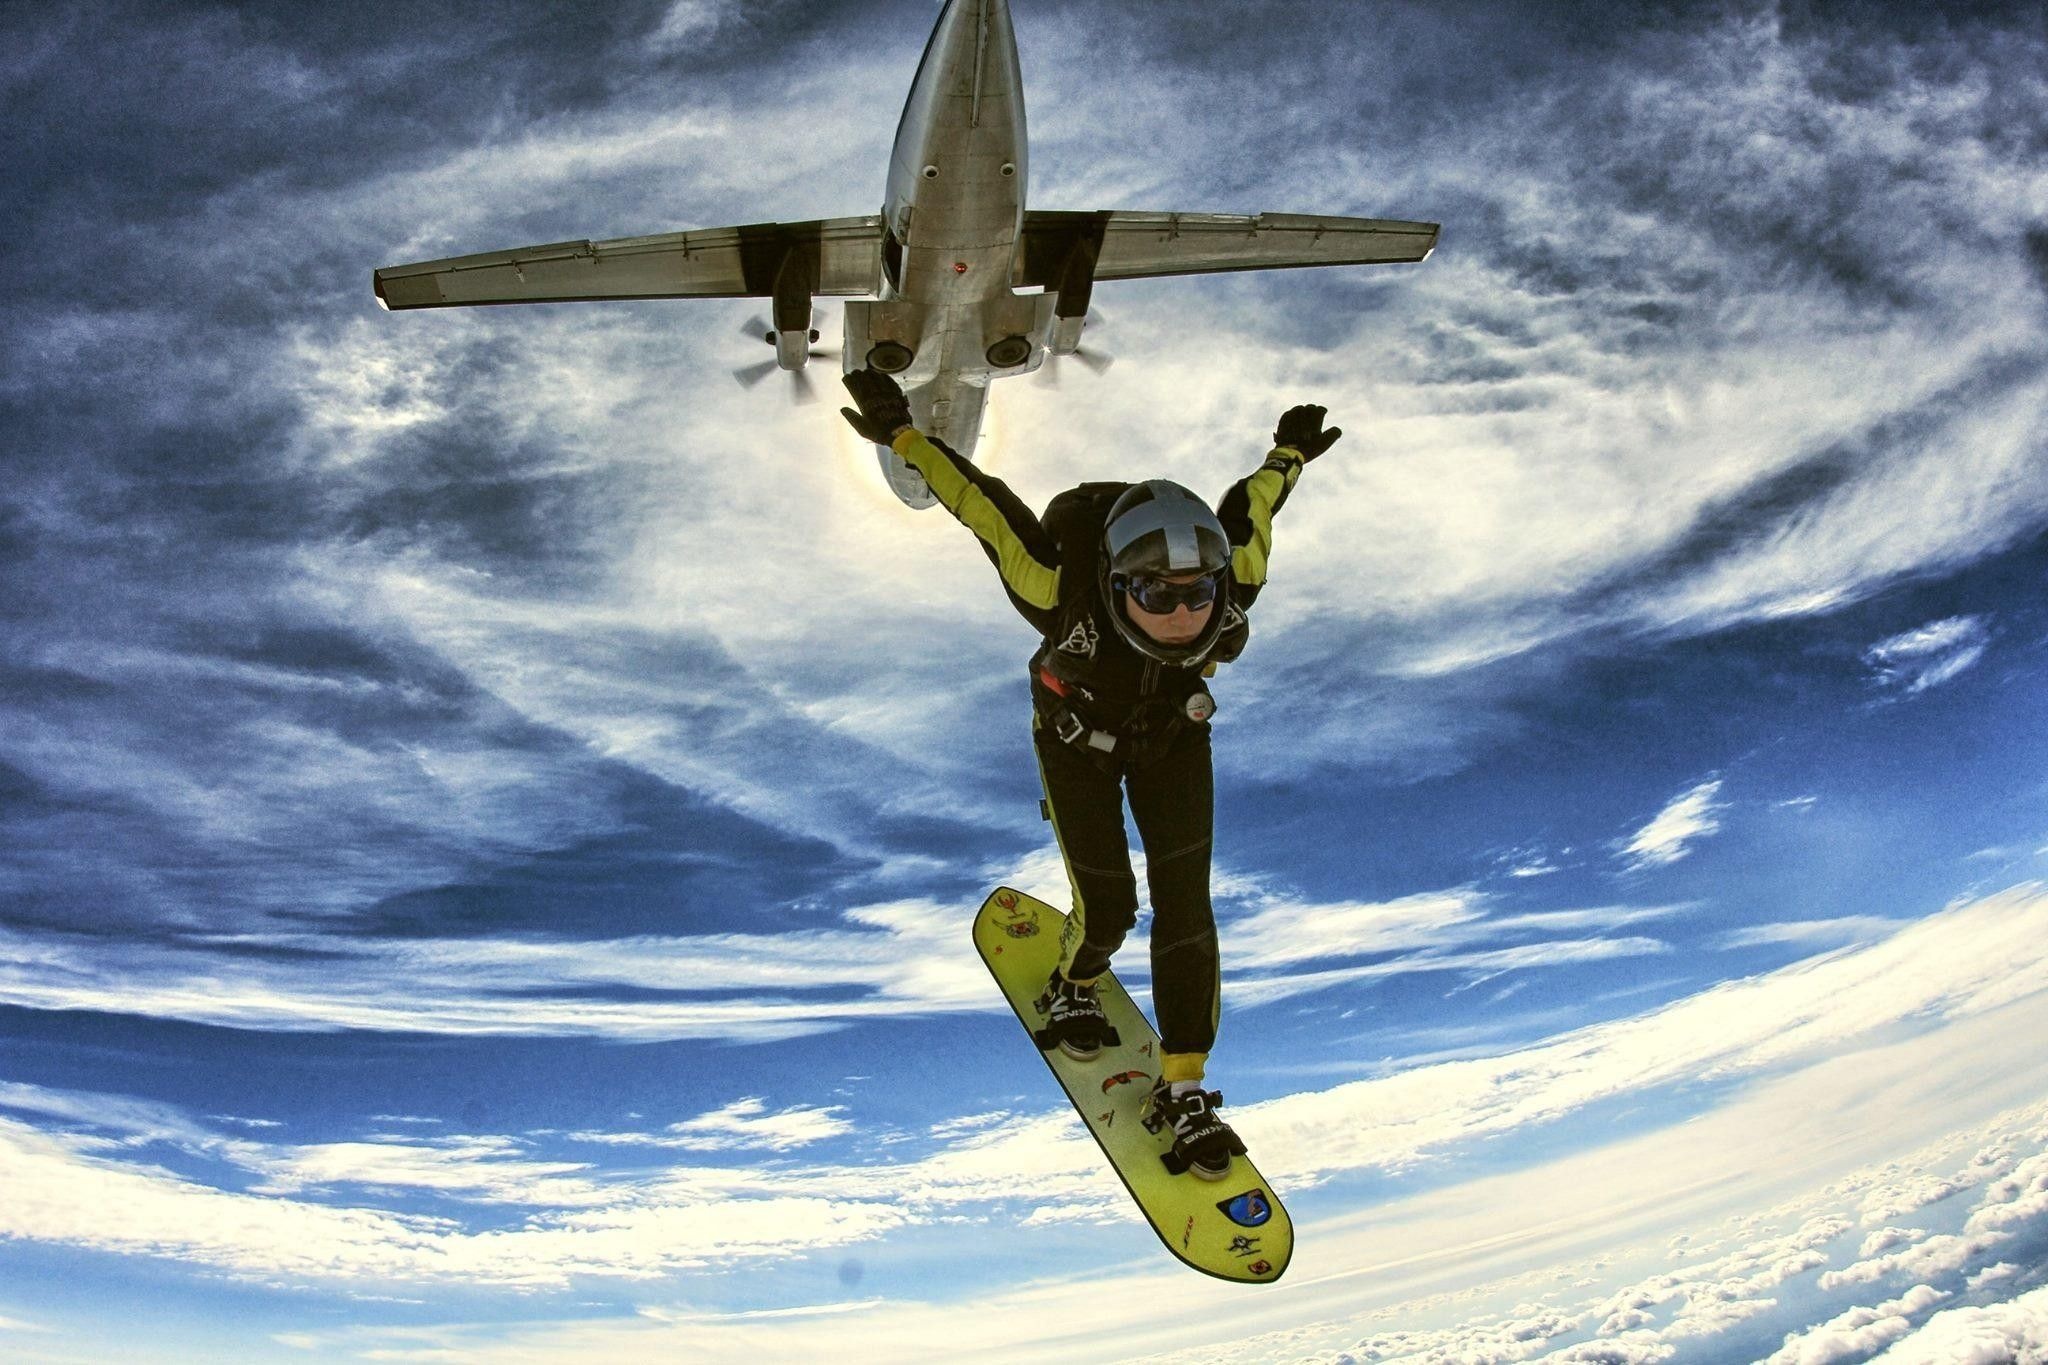 Skysurfing: Freestyle skydiving, Two-person team, Skydiver and camera operator teammate. 2050x1370 HD Background.